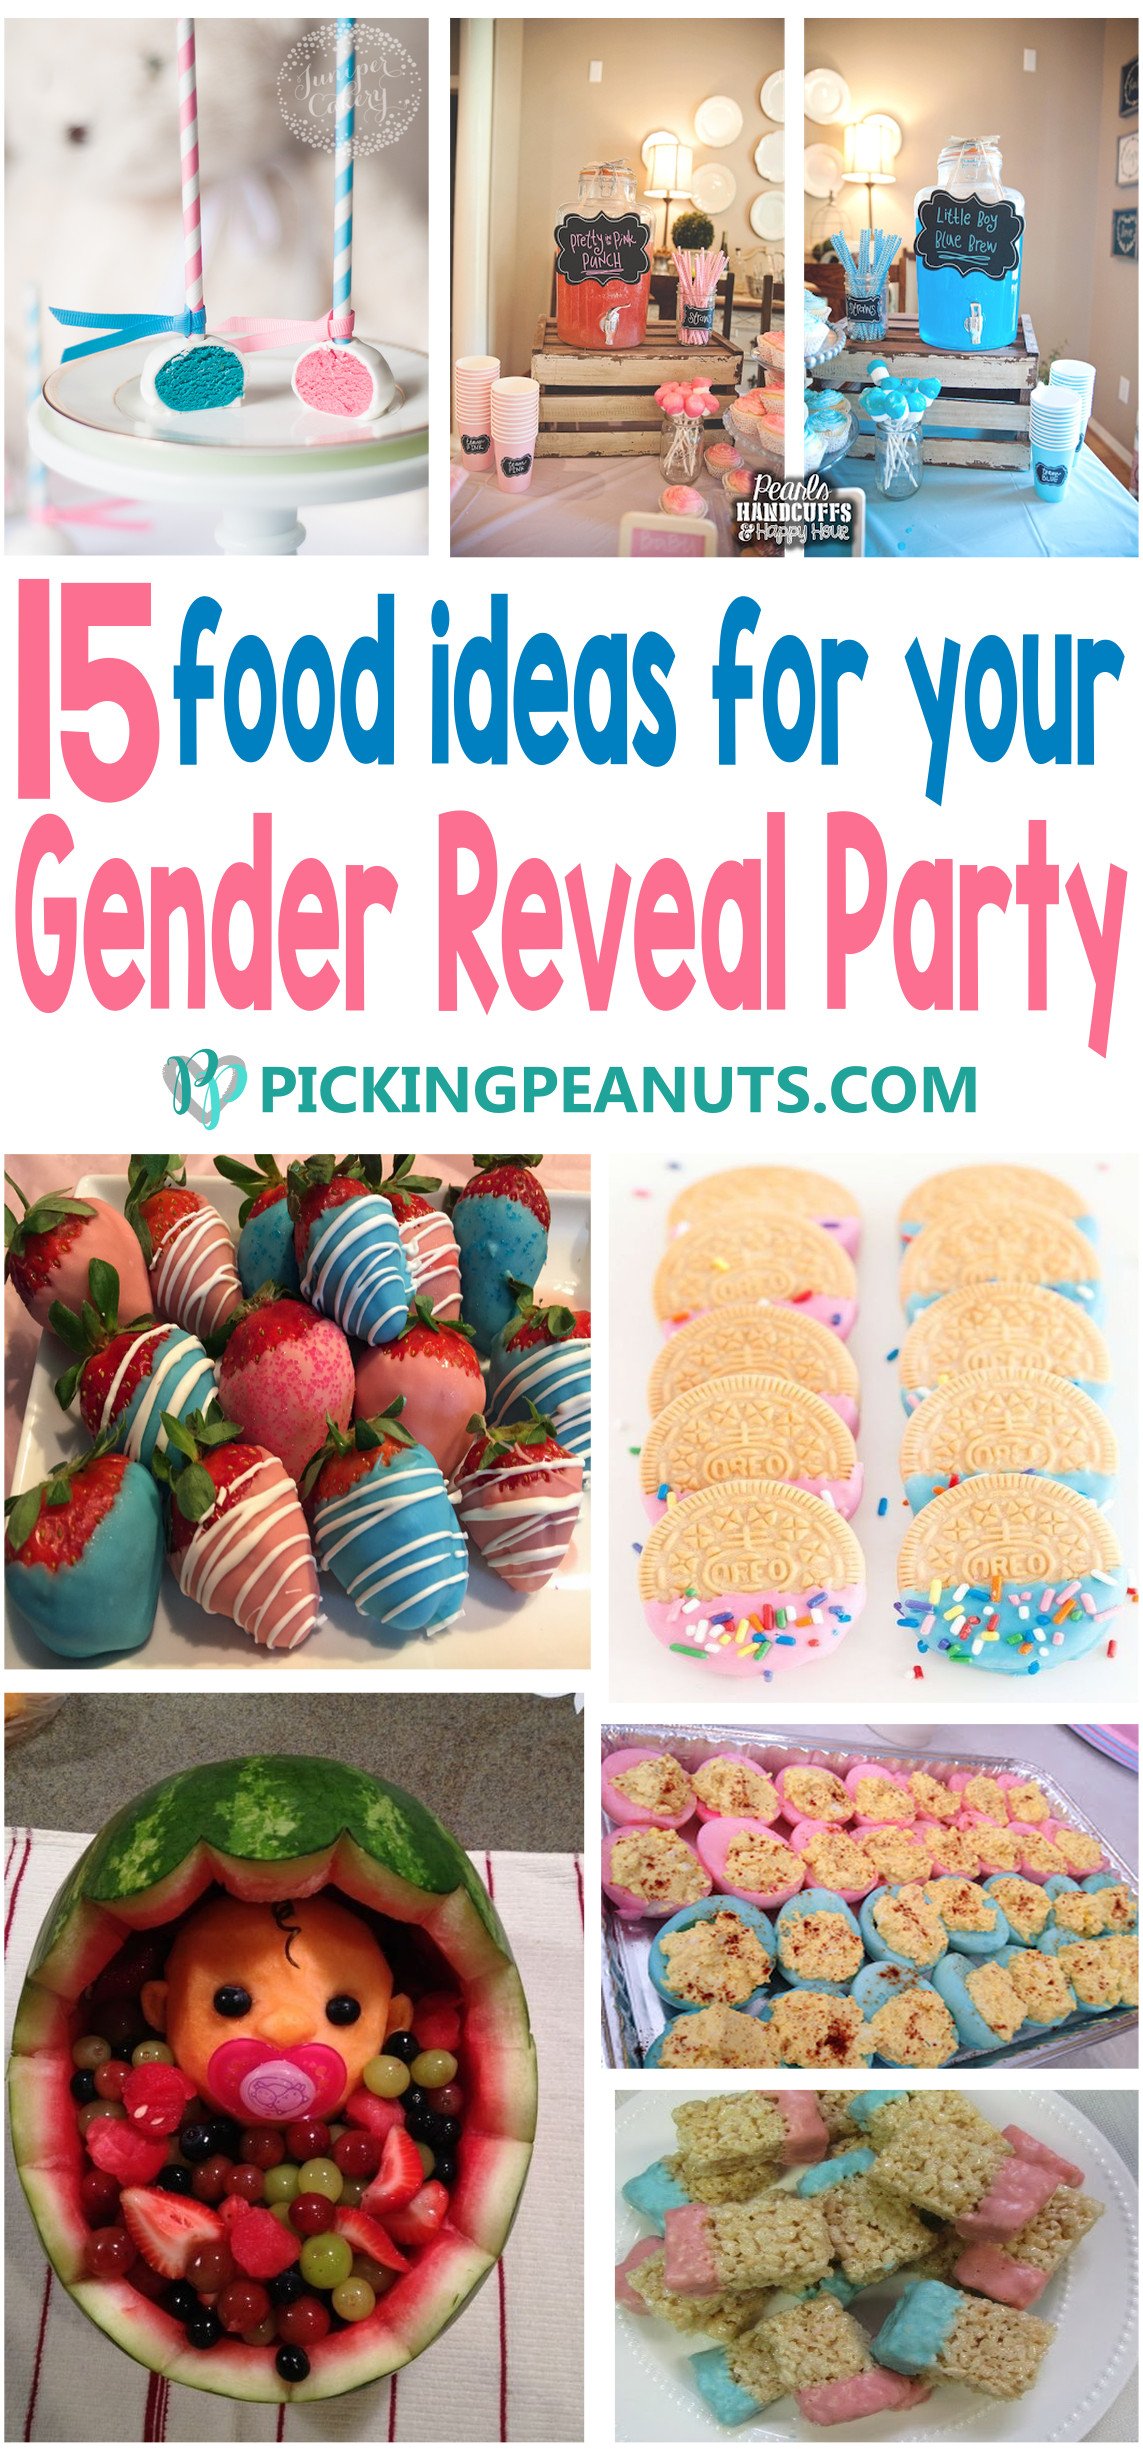 Reveal Party Food Ideas
 15 Gender Reveal Party Food Ideas Picking Peanuts